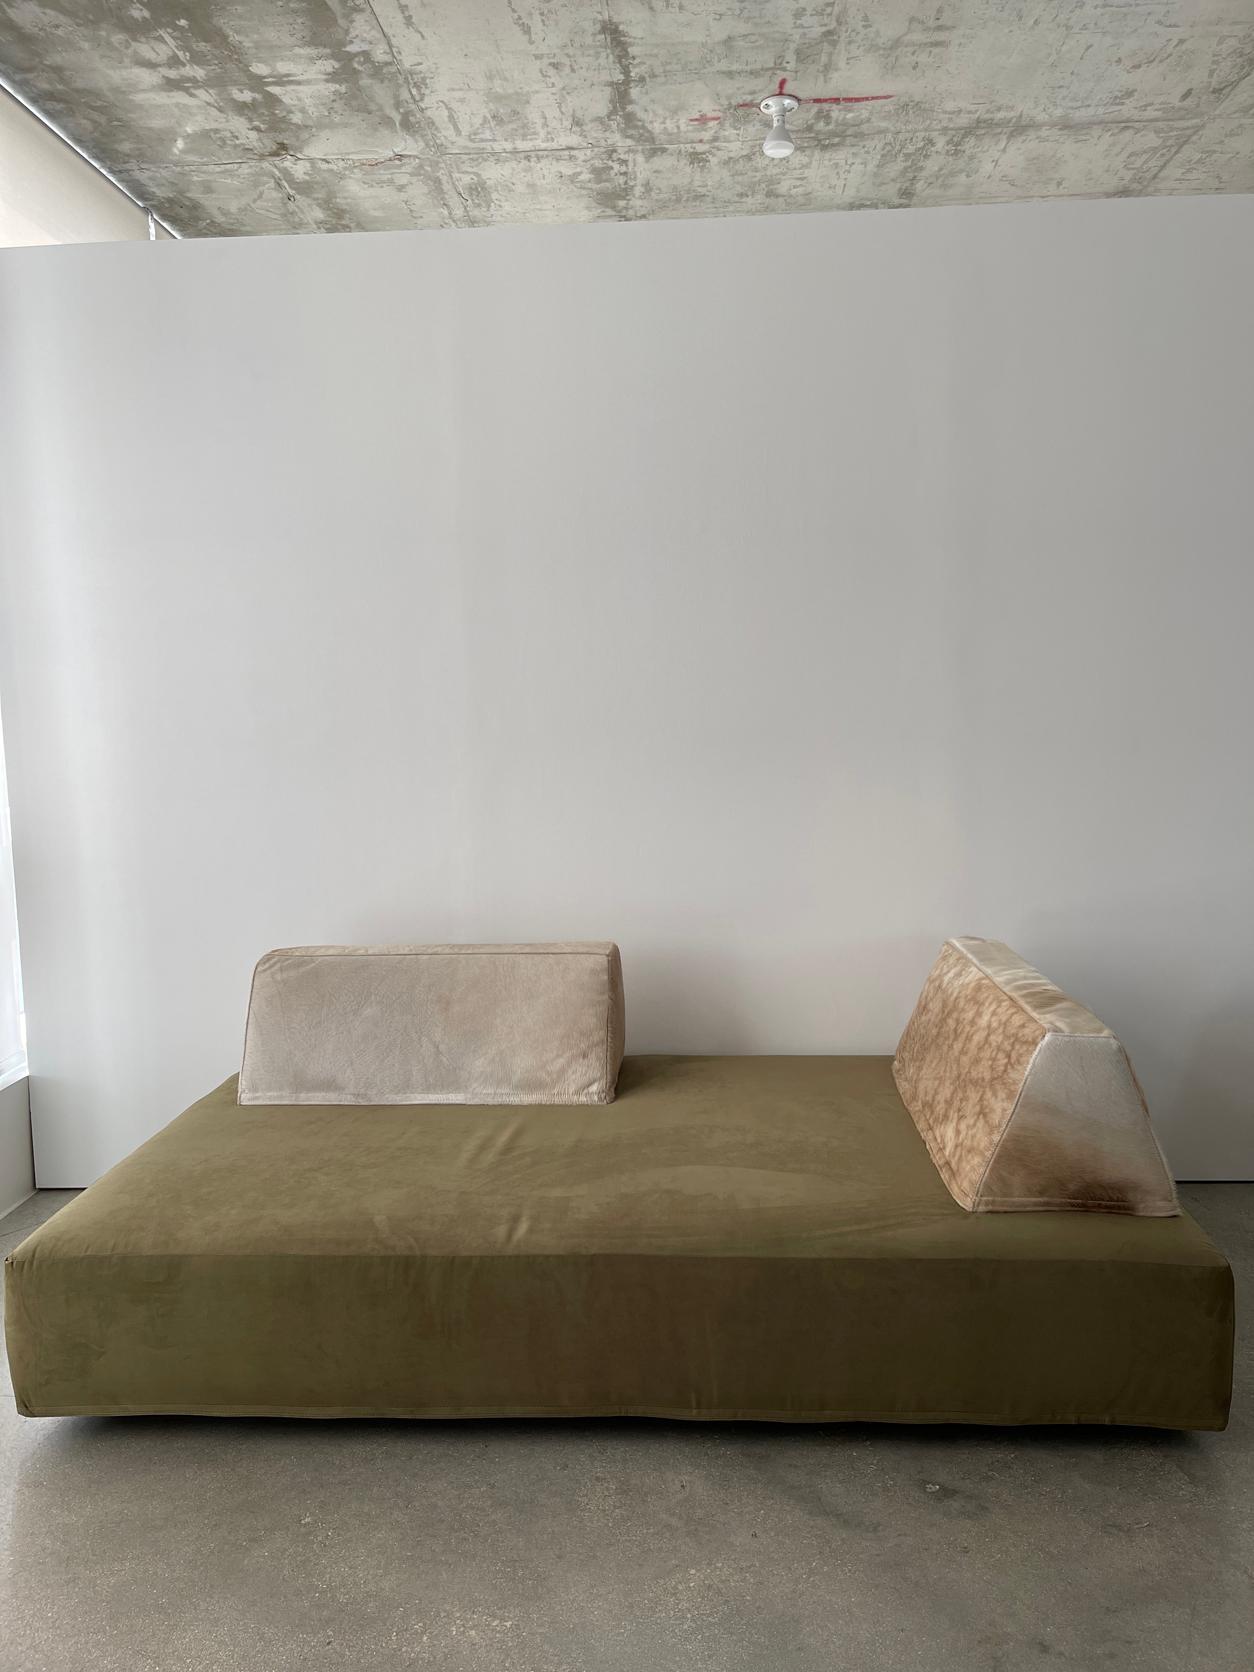 21st century velvet and cowhide daybed sofa with a soft beautiful olive color and a Texan Cowhide with neutral shades of color. Cowhide back rests are moveable and weighted to help from slipping. Gold Velvet sofa sold separately in the exact same